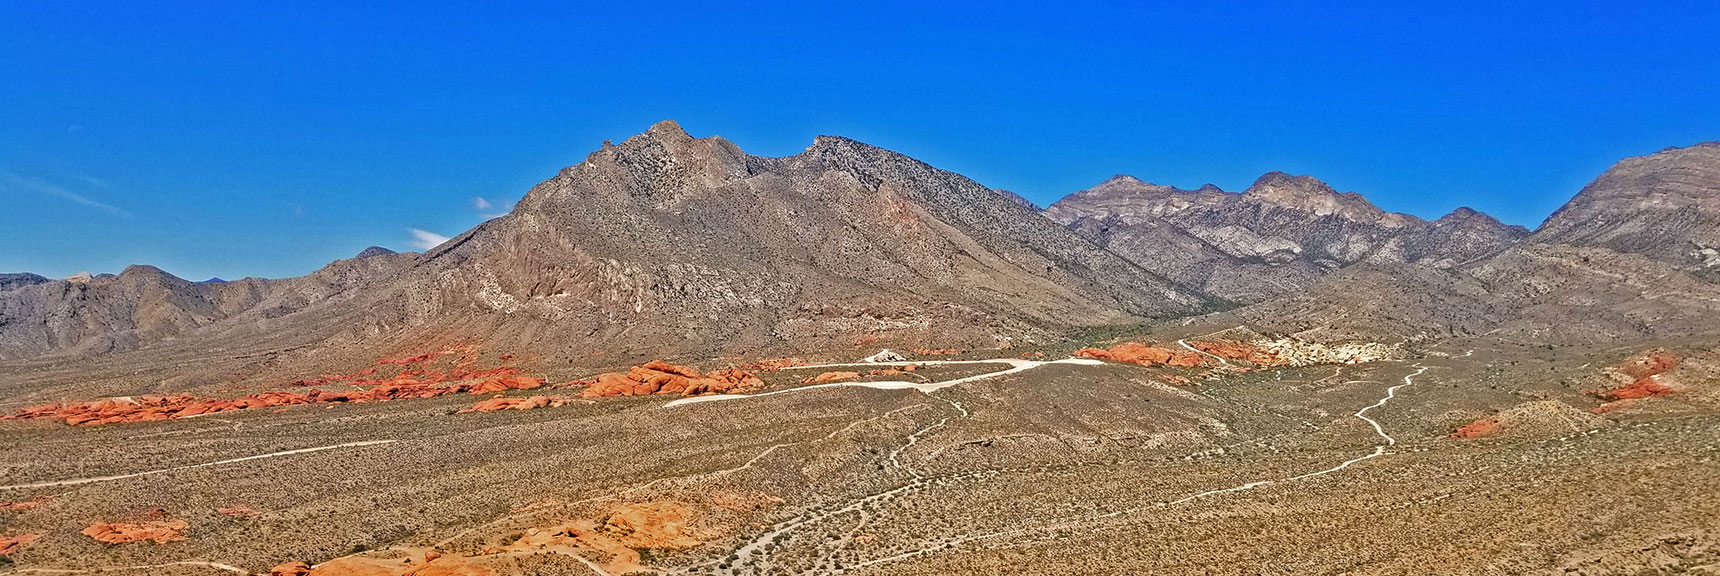 View of Little Red Rock Area at Base of Damsel Peak | Little La Madre Mt, Little El Padre Mt, Little Burnt Peak | Near La Madre Mountains Wilderness, Nevada